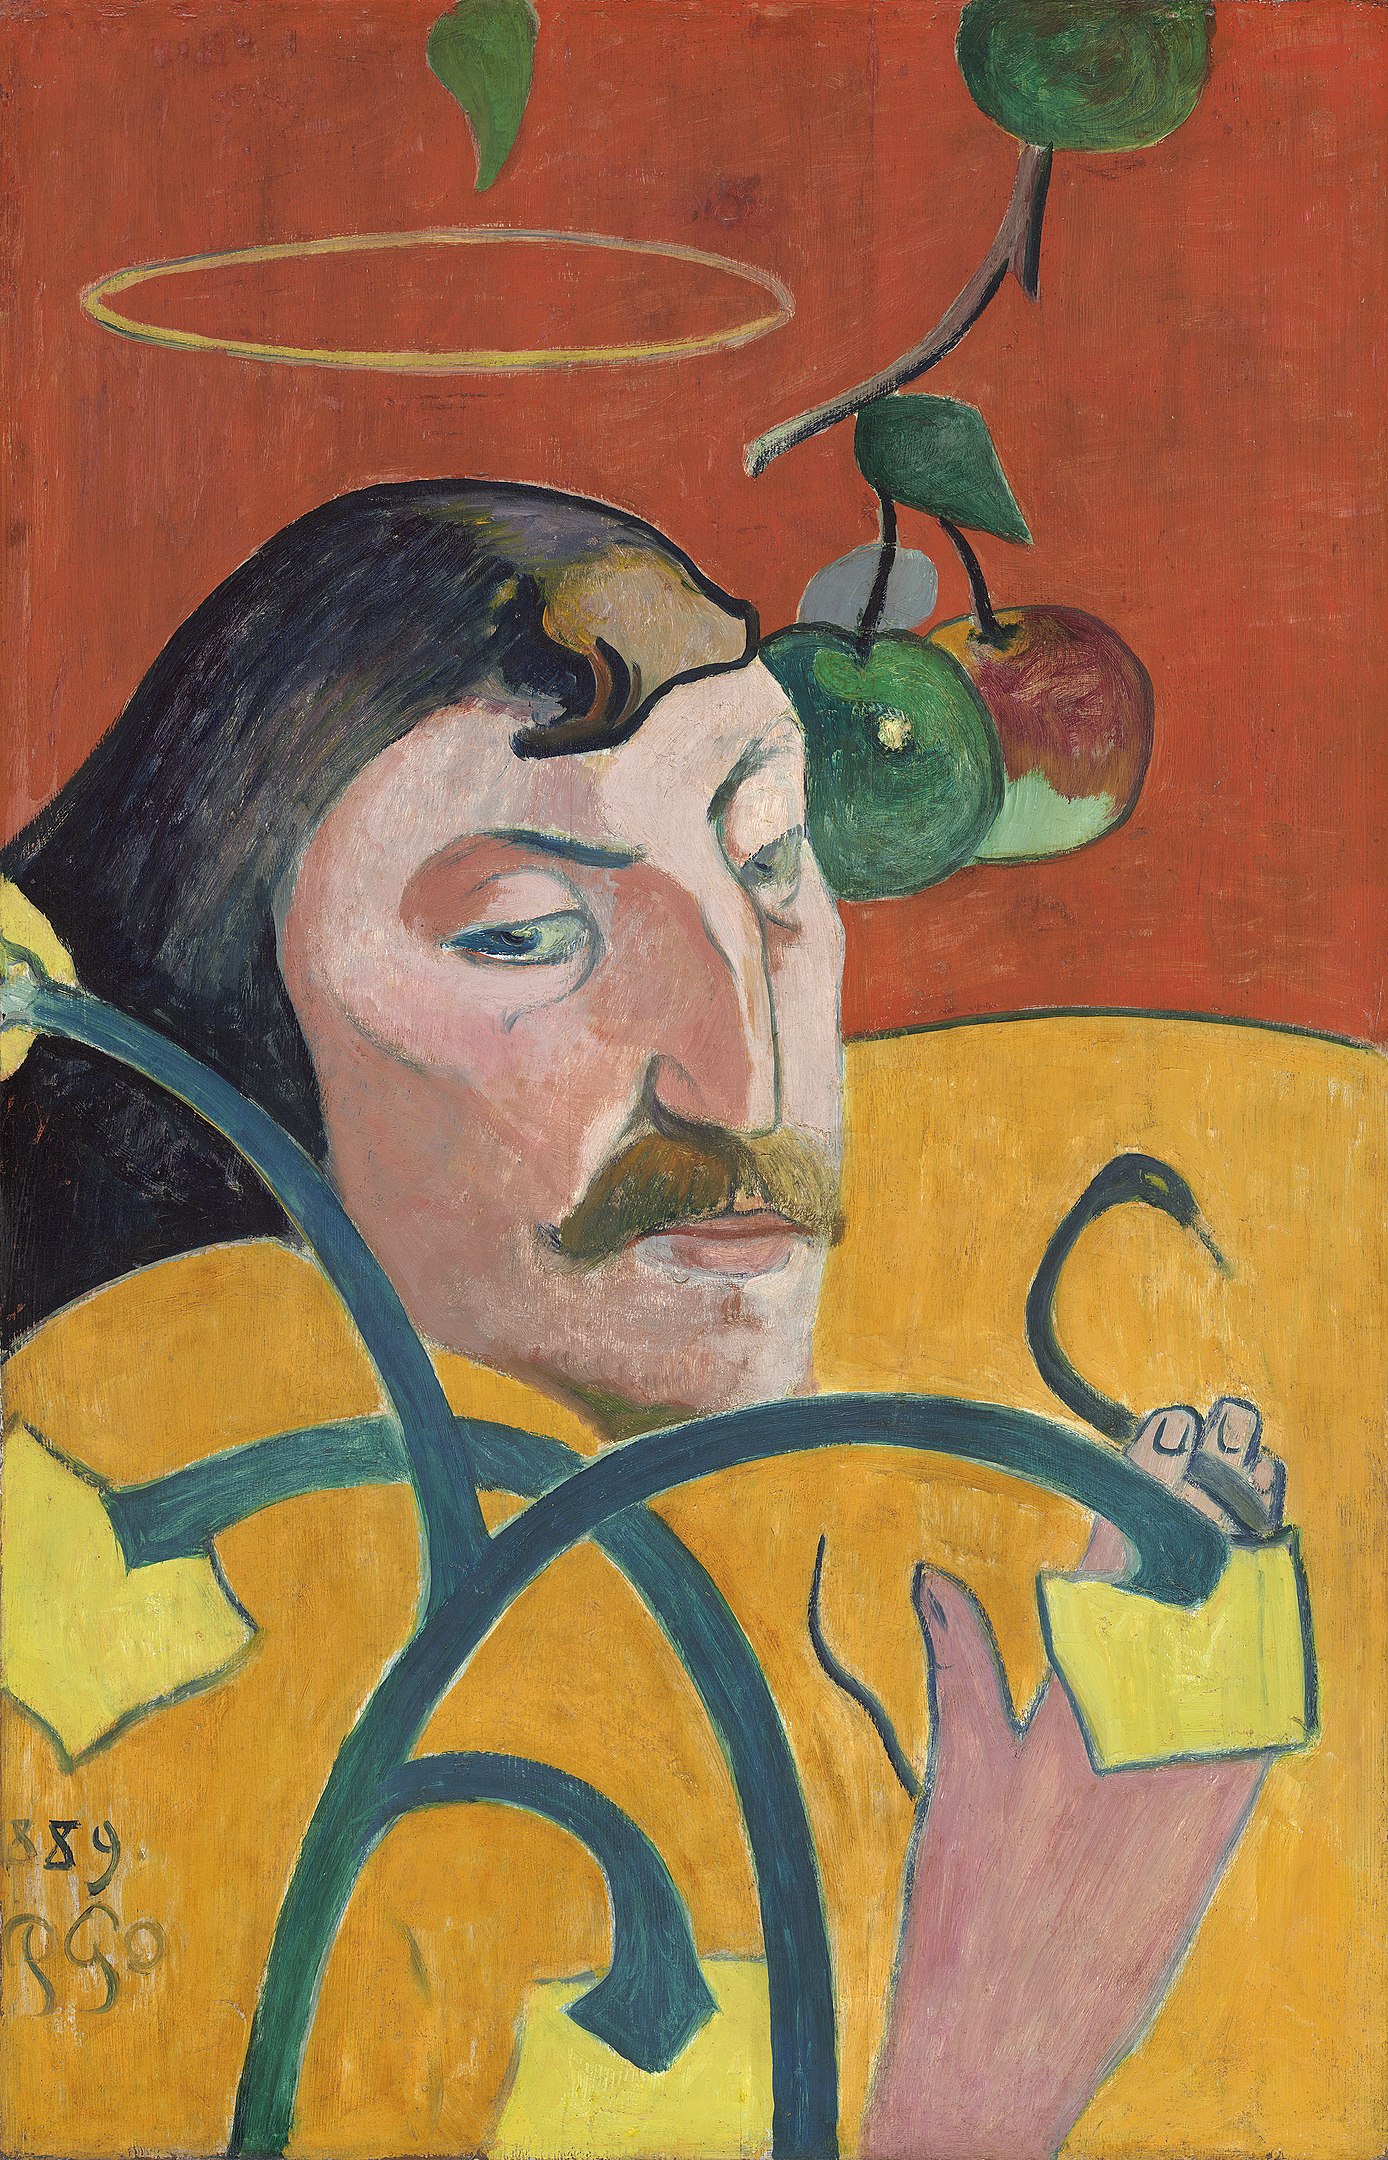 An abstract depiction of a man's head floating in a still-life landscape with fruit and flowers